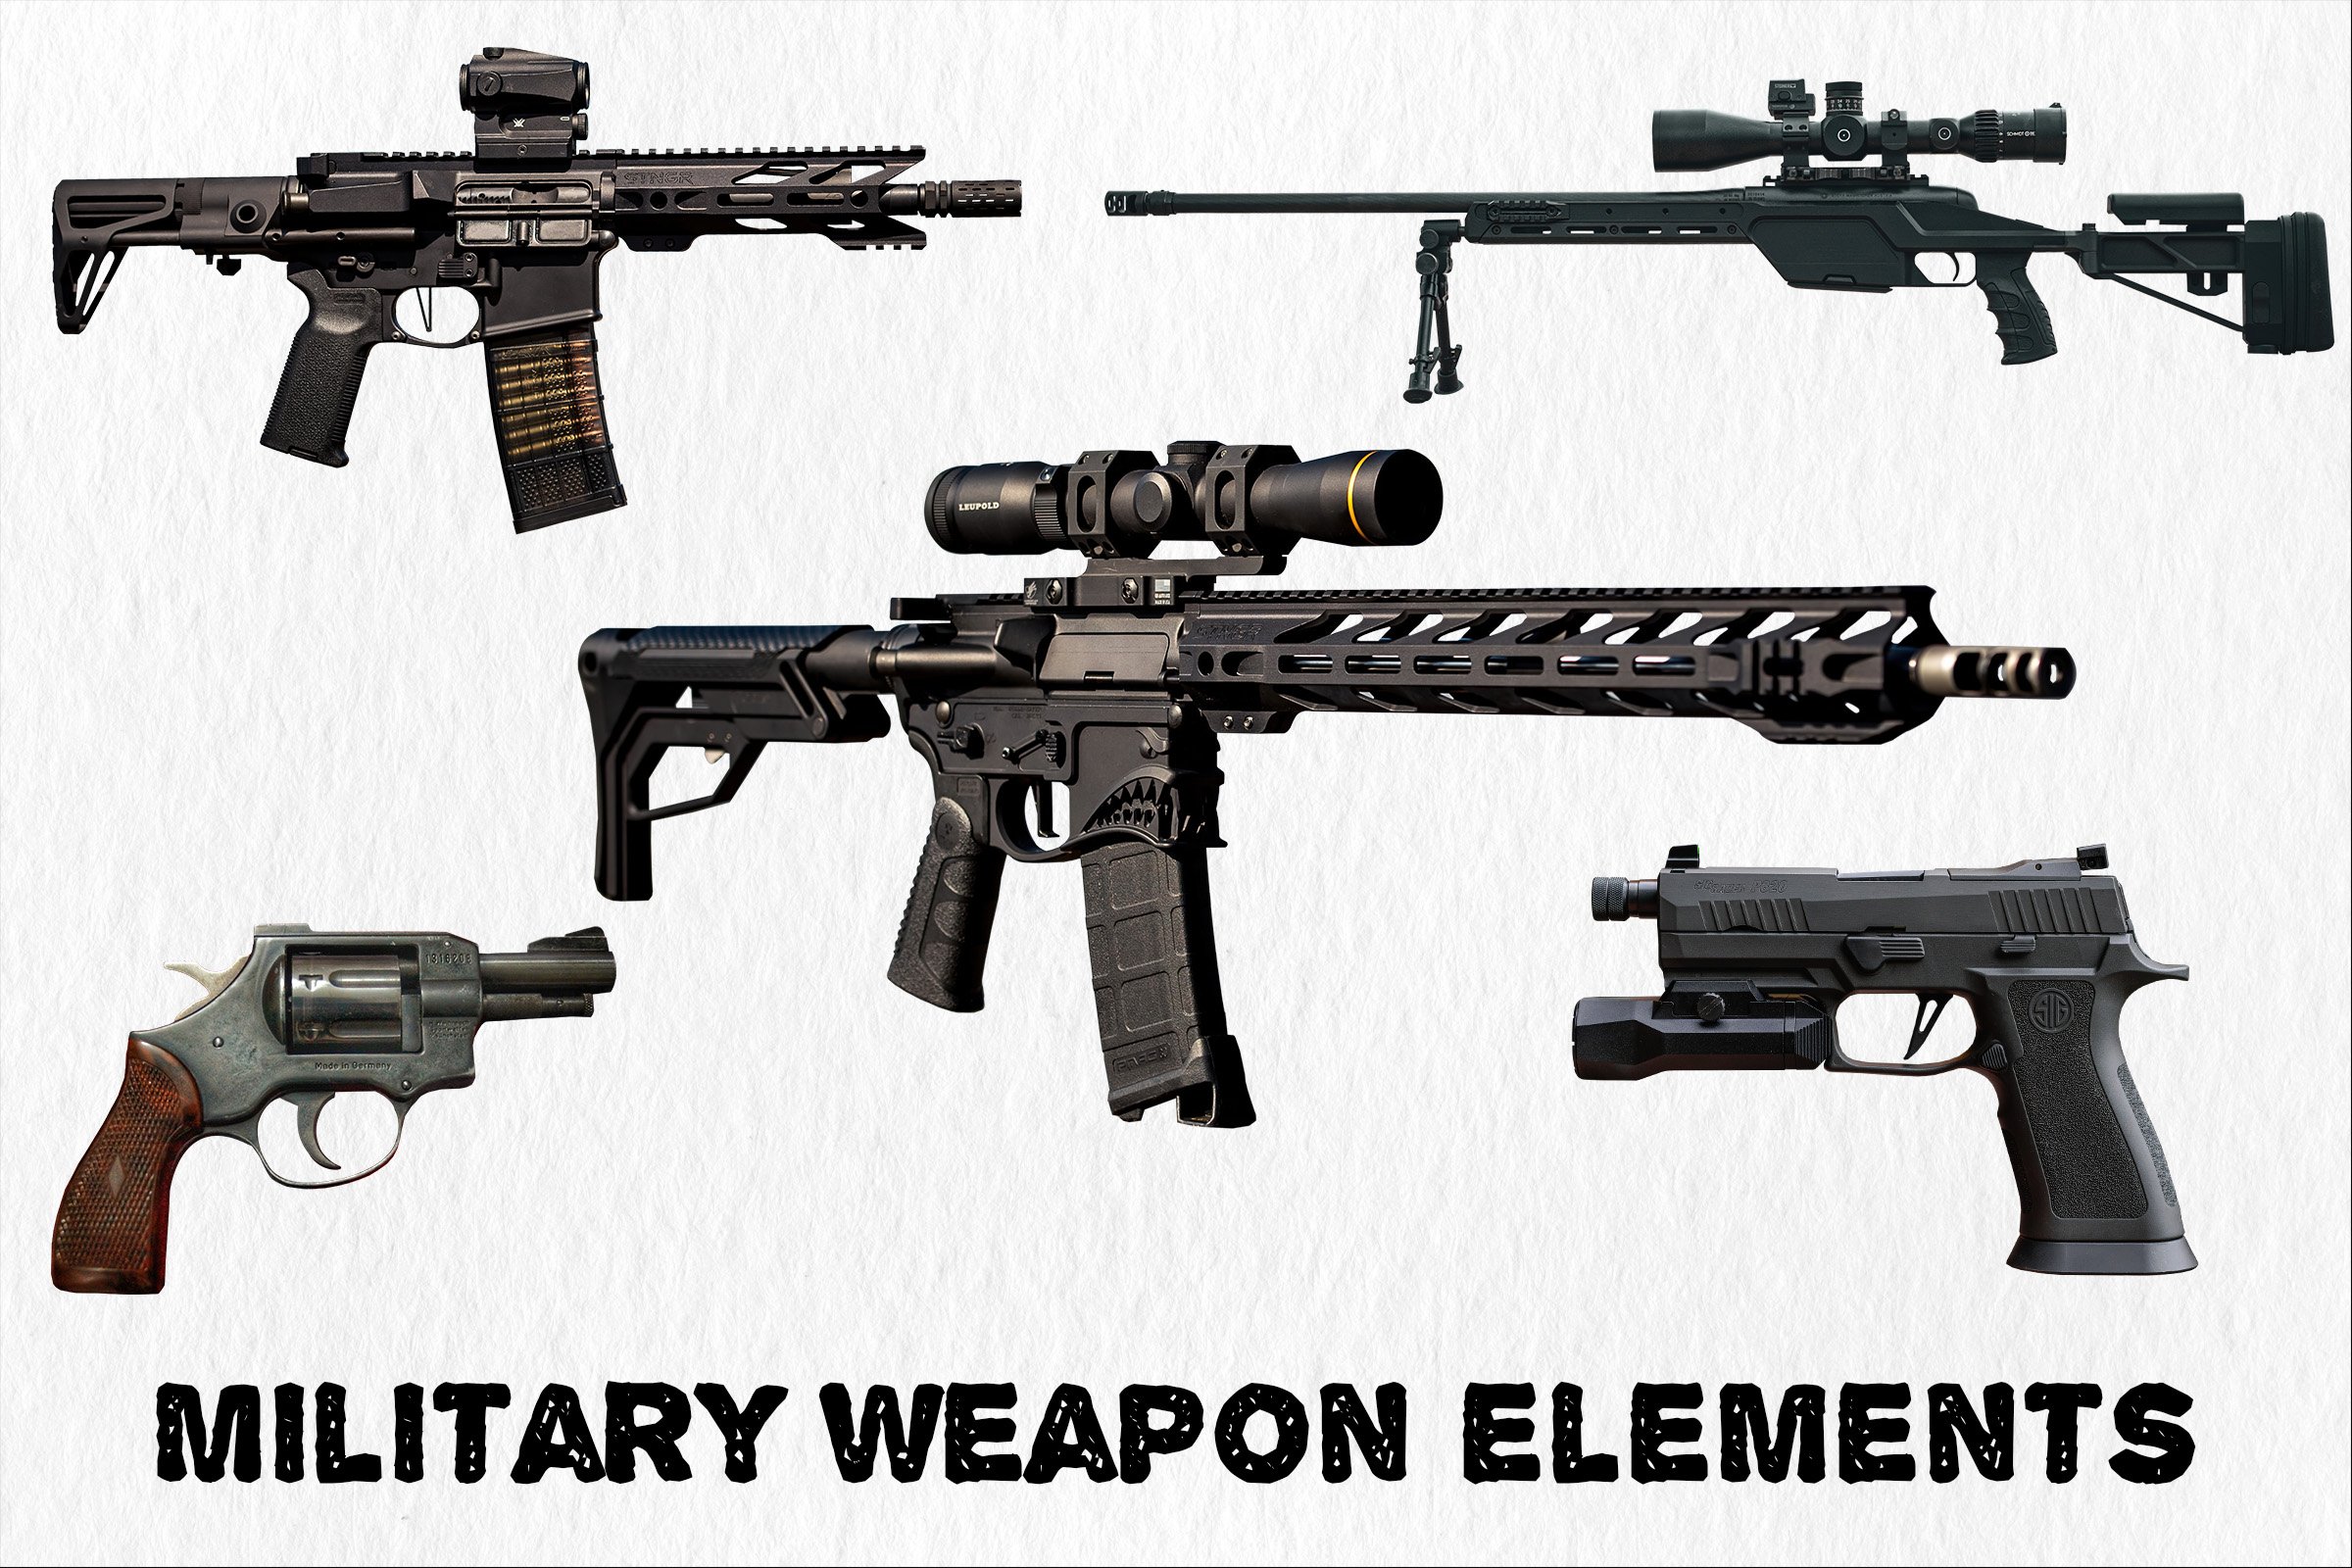 Gun Weapons Images cover image.